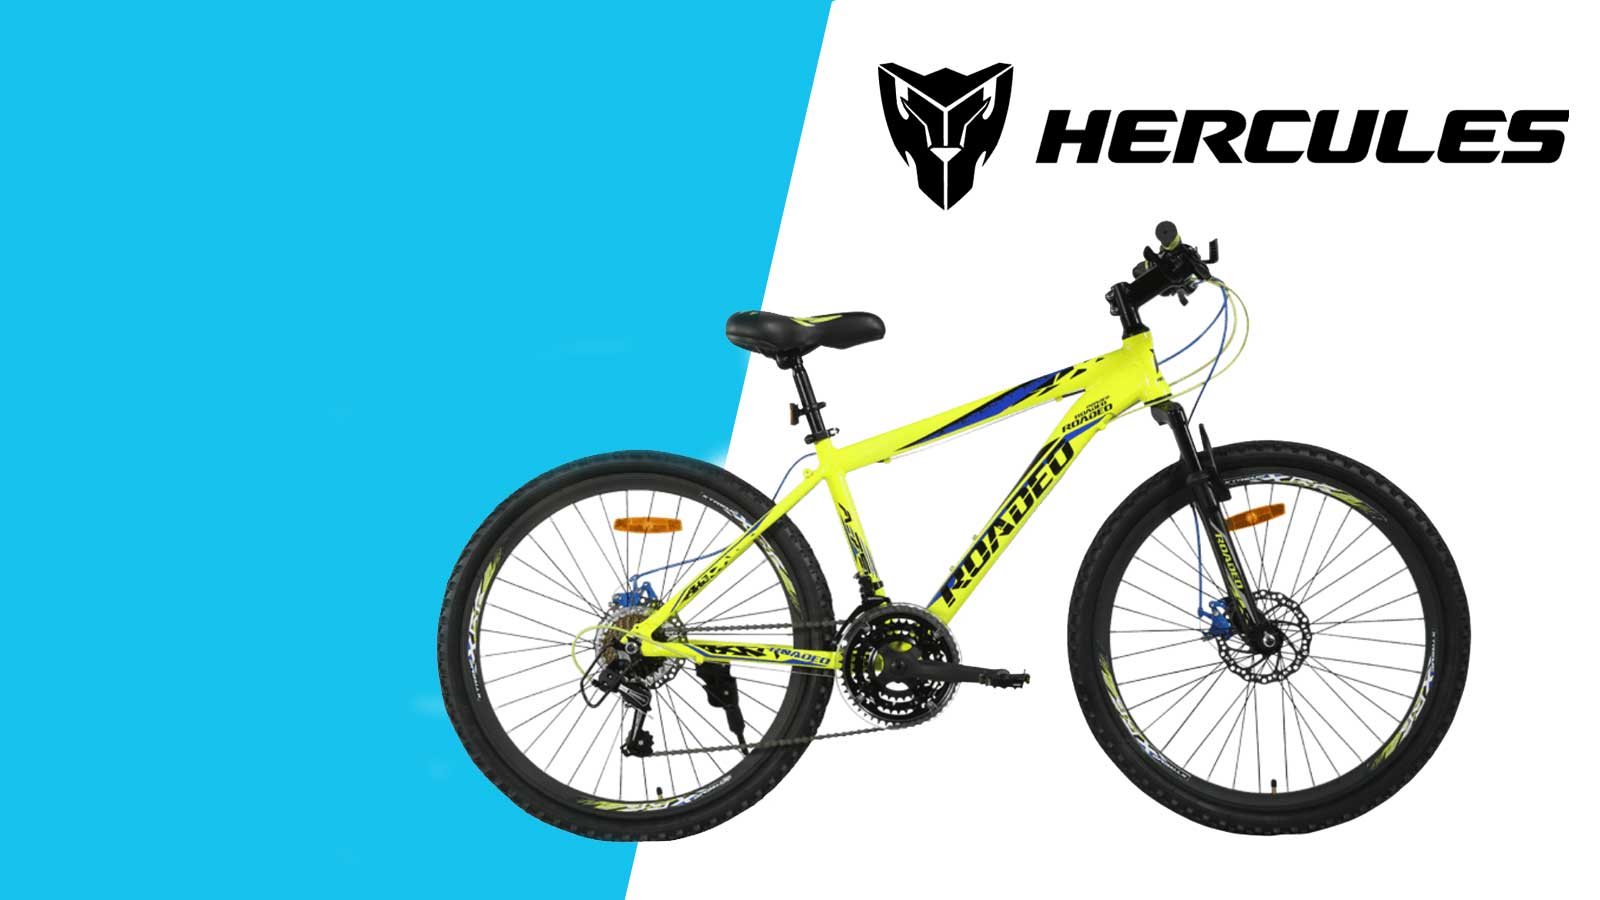 Top 10 Hercules Gear Cycles In India [Price, Disc Brake & Features]